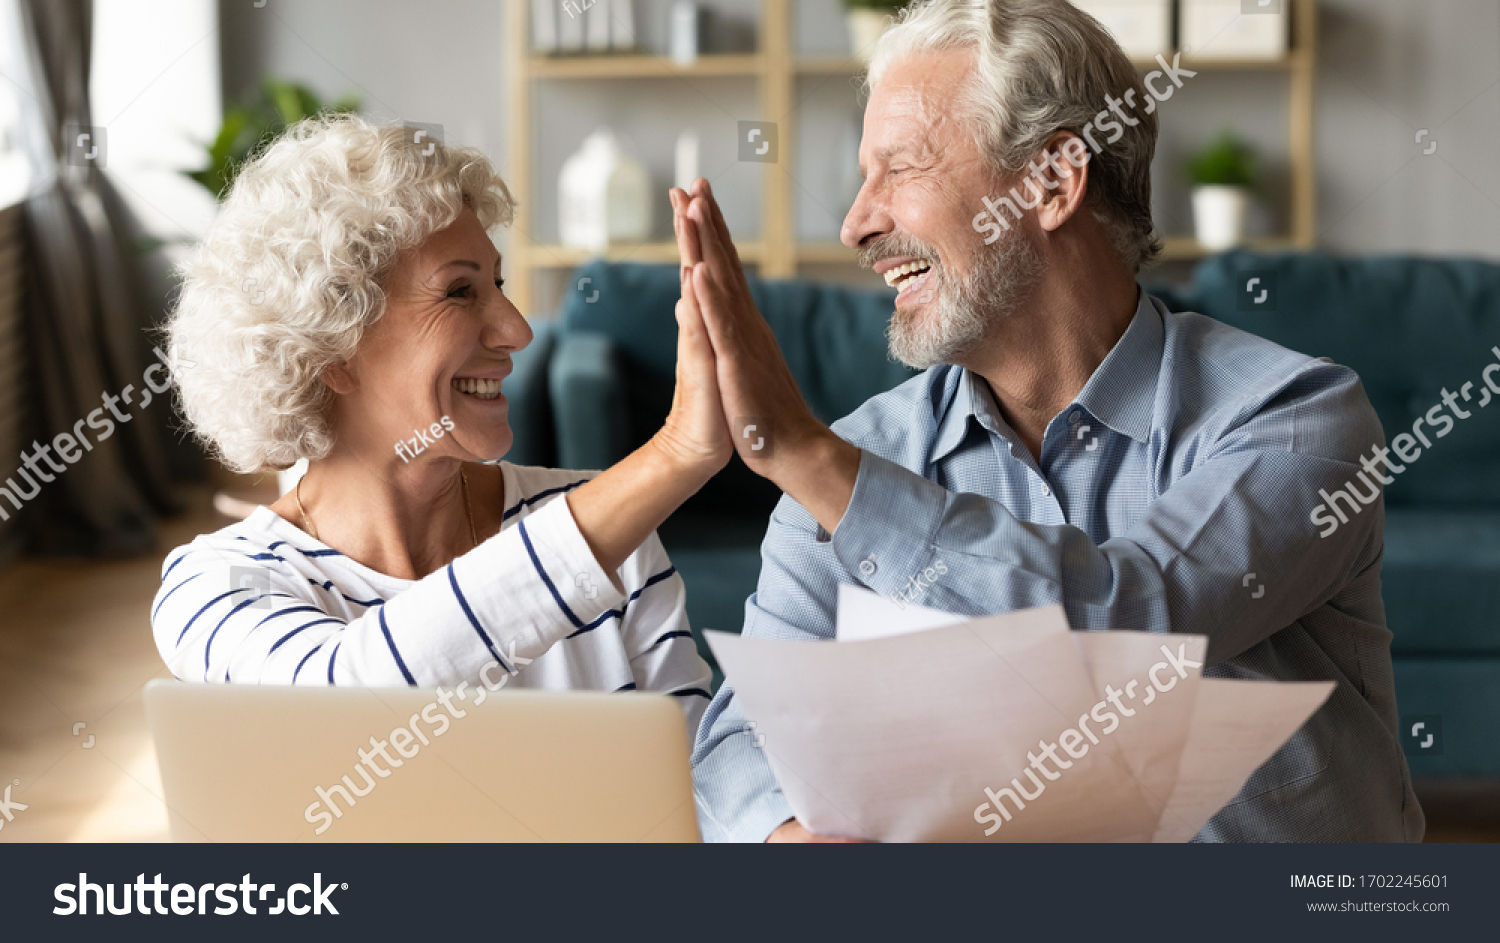 Excited older couple giving high five, mature family celebrating success, checking or paying domestic bills, planning budget, smiling mature man holding financial documents, reading good news #1702245601